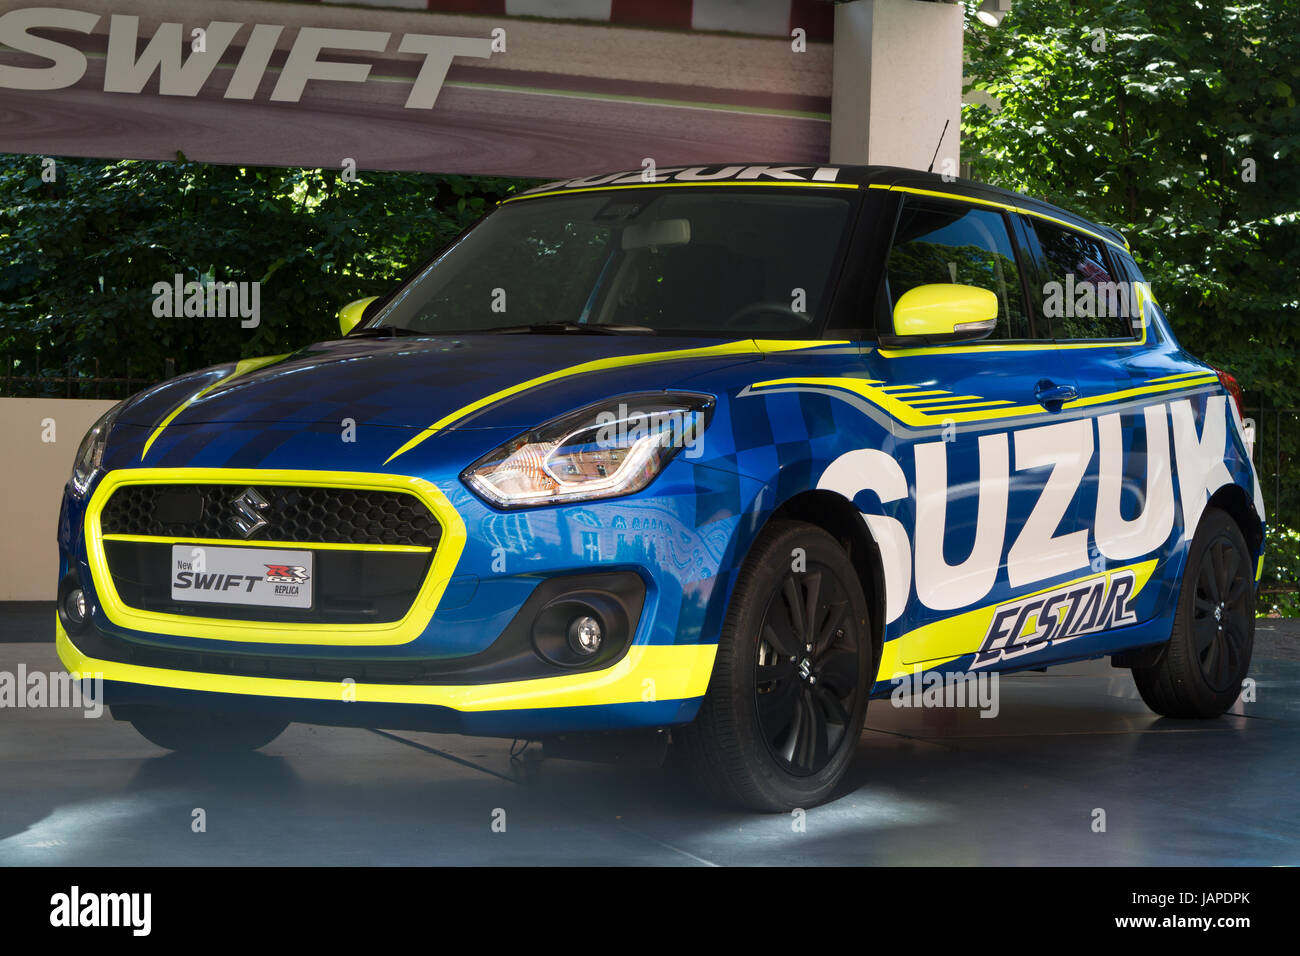 Turin, Italy, 7th June 2017. A Suzuki New Swift. Third edition of Parco Valentino car show hosts cars by many automobile manufacturers and car designers inside Valentino Park in Torino, Italy. Stock Photo